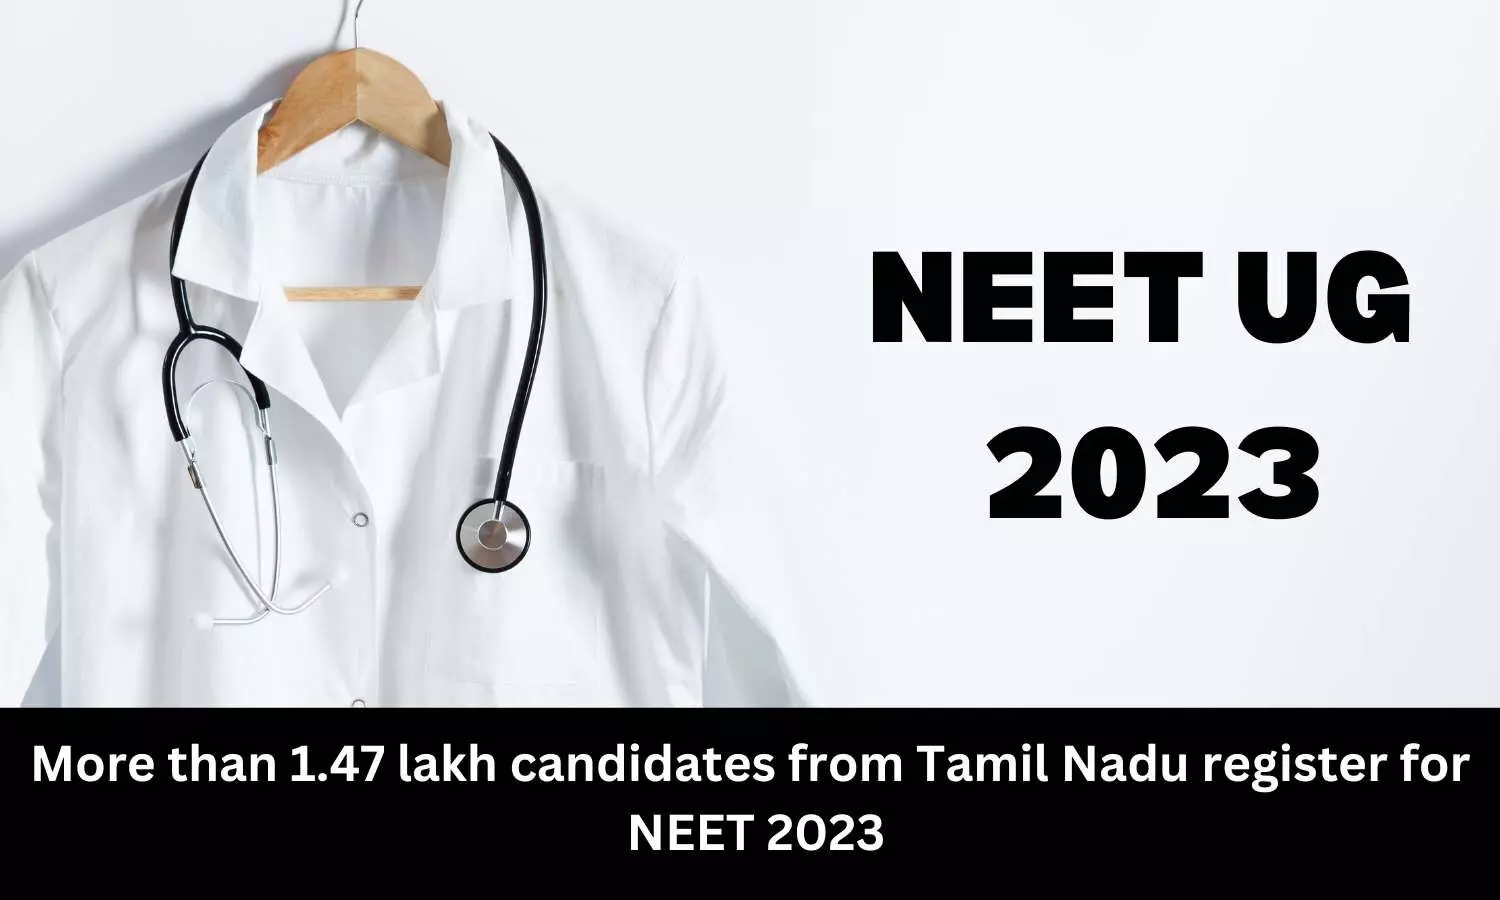 Over 1.47 lakh candidates from Tamil Nadu register for NEET 2023